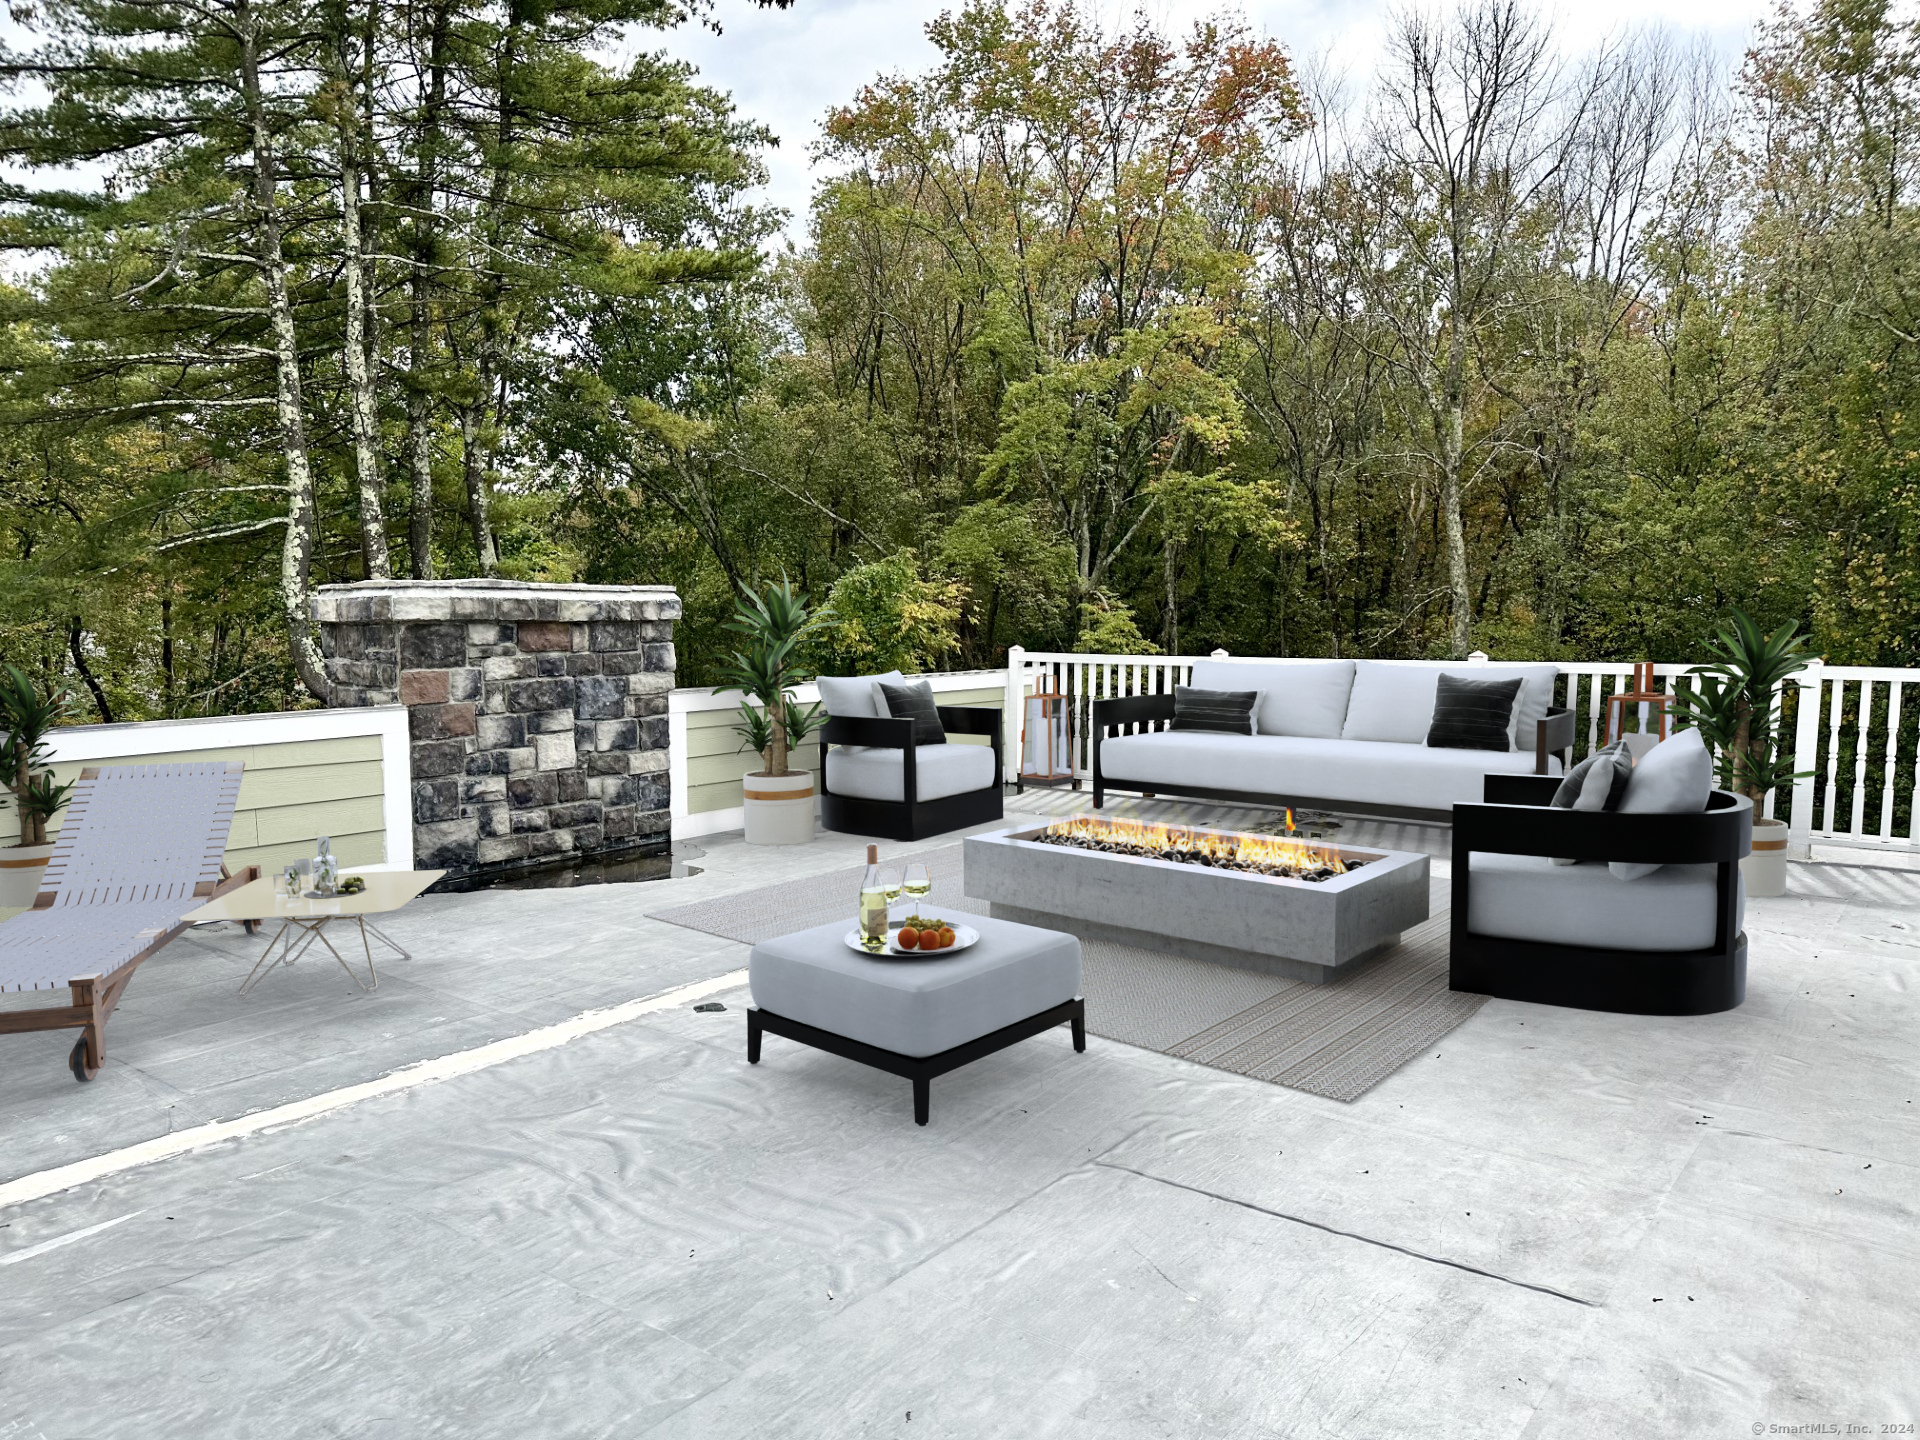 Enjoy the fabulous Rooftop Sundeck (Virtually staged) surrounded by beautiful nature, 1.24 acre adjacent lot of donated land to Stamford Land Trust!